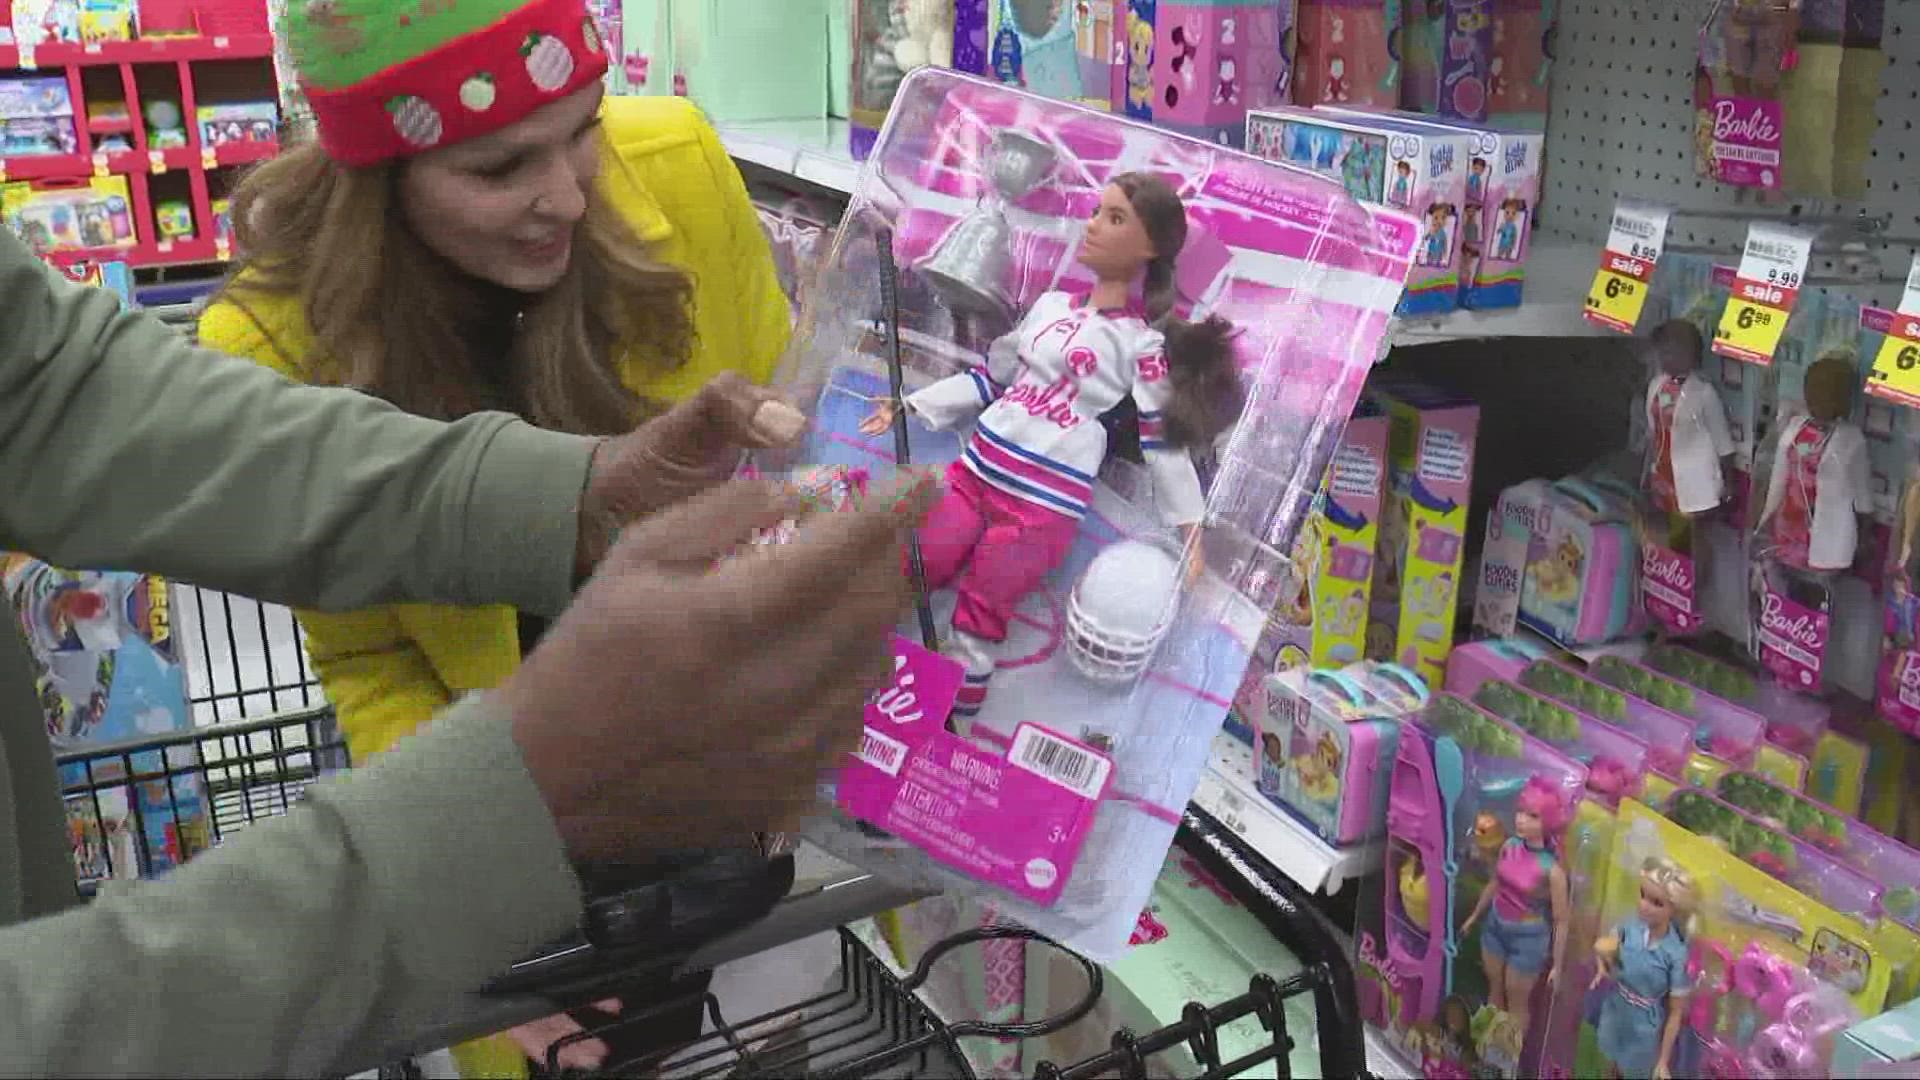 The organization adopts families for the holidays, and wants to adopt more than ever this year.